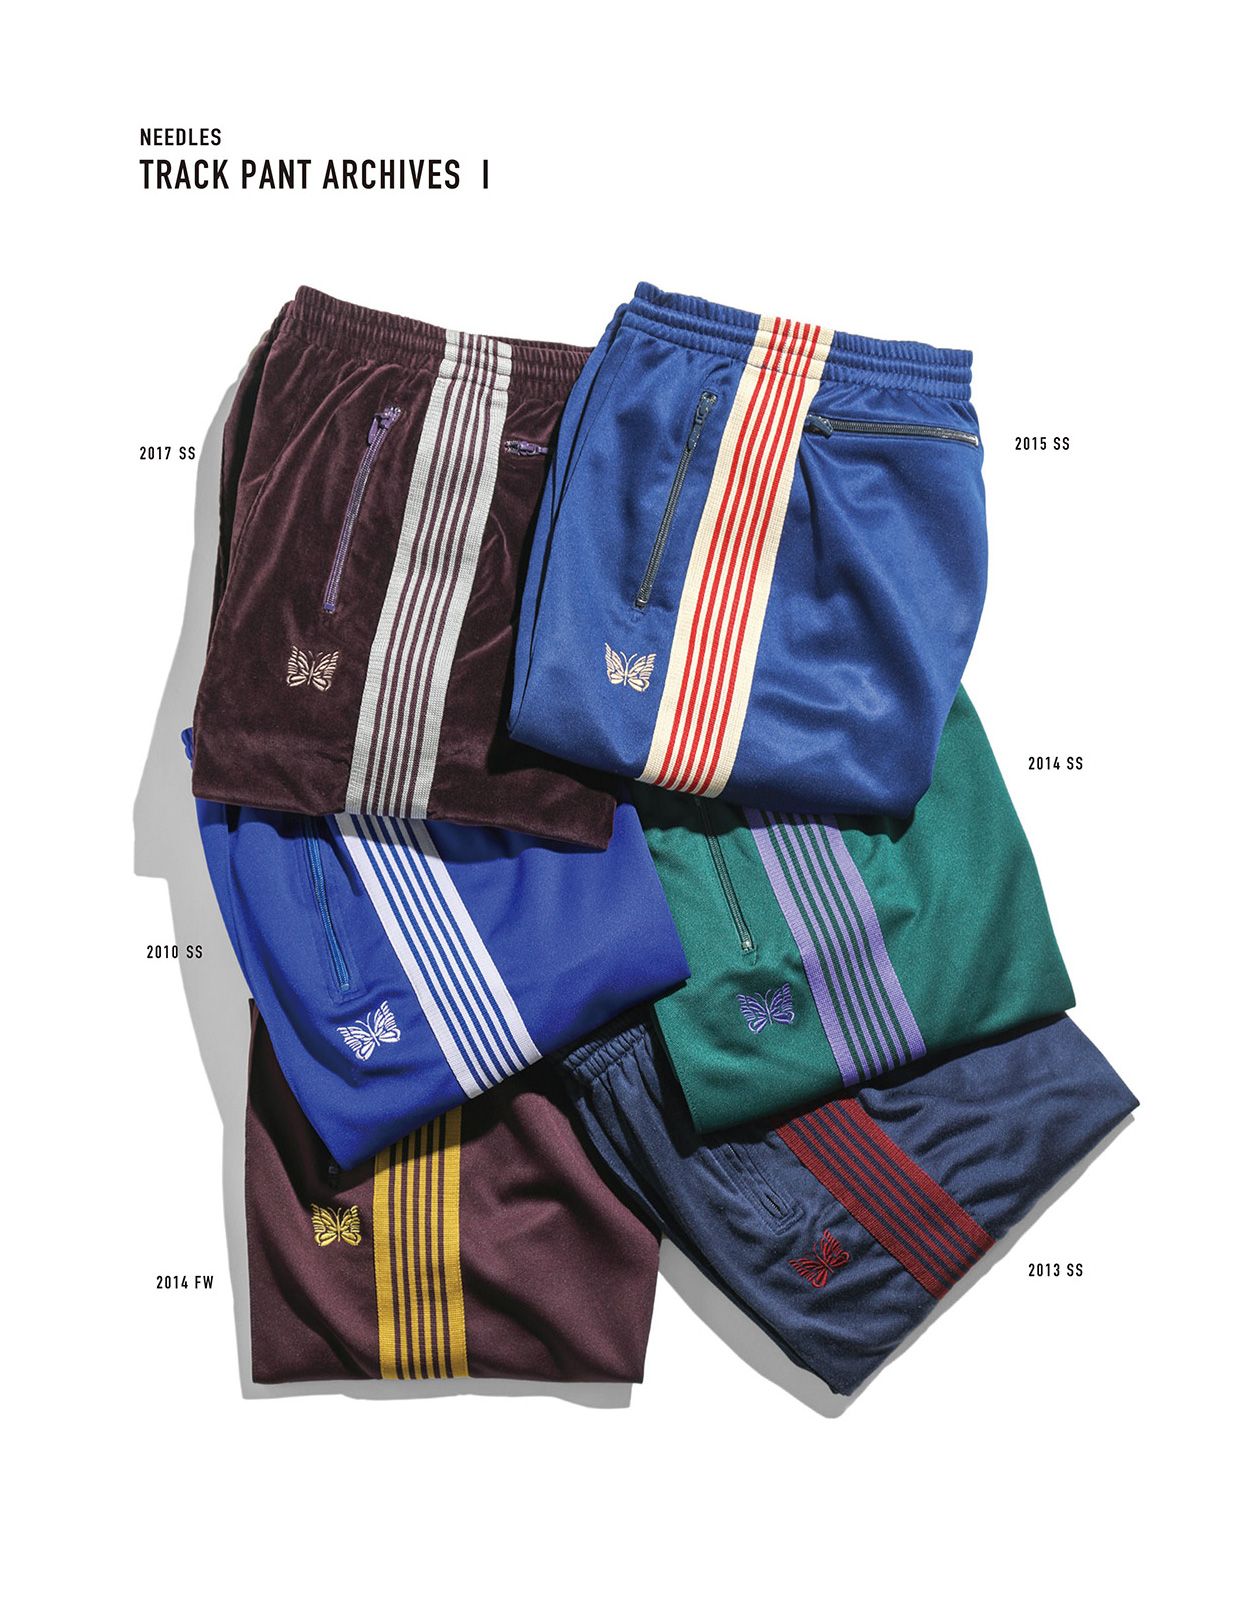 THE HISTORY OF NEEDLES TRACK PANT